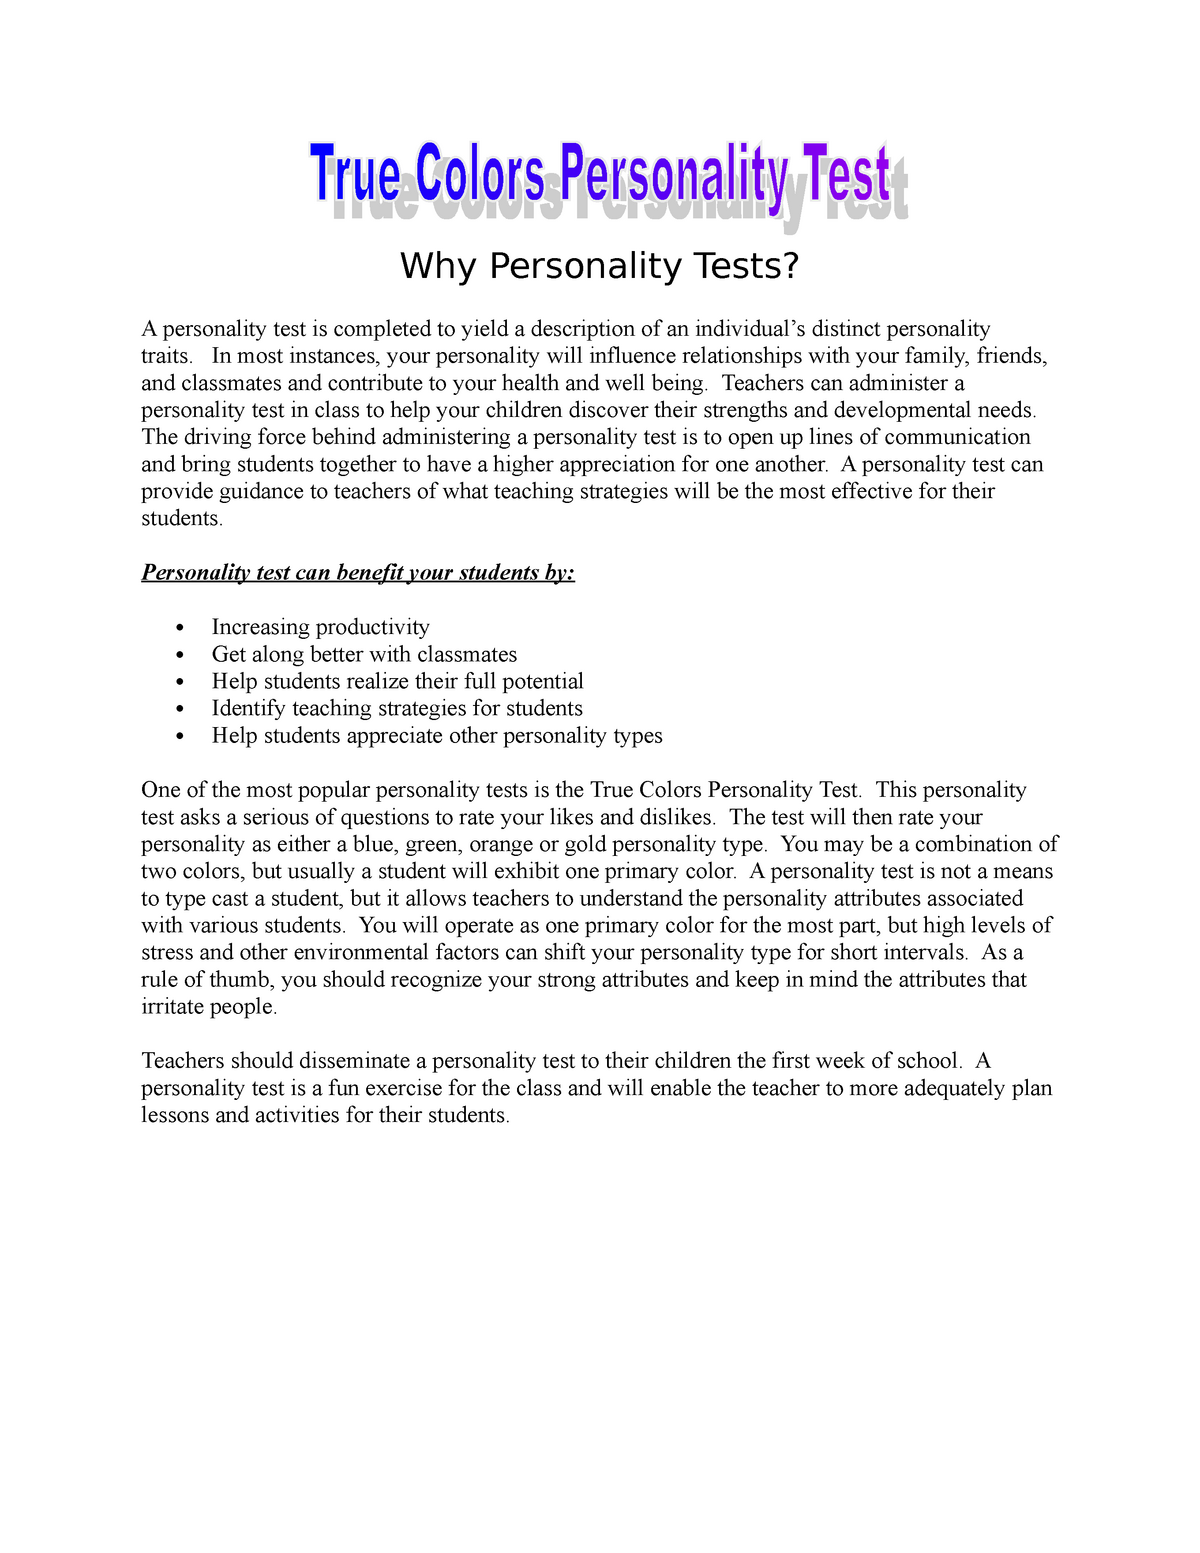 color-personality-test-supplemental-work-why-personality-tests-a